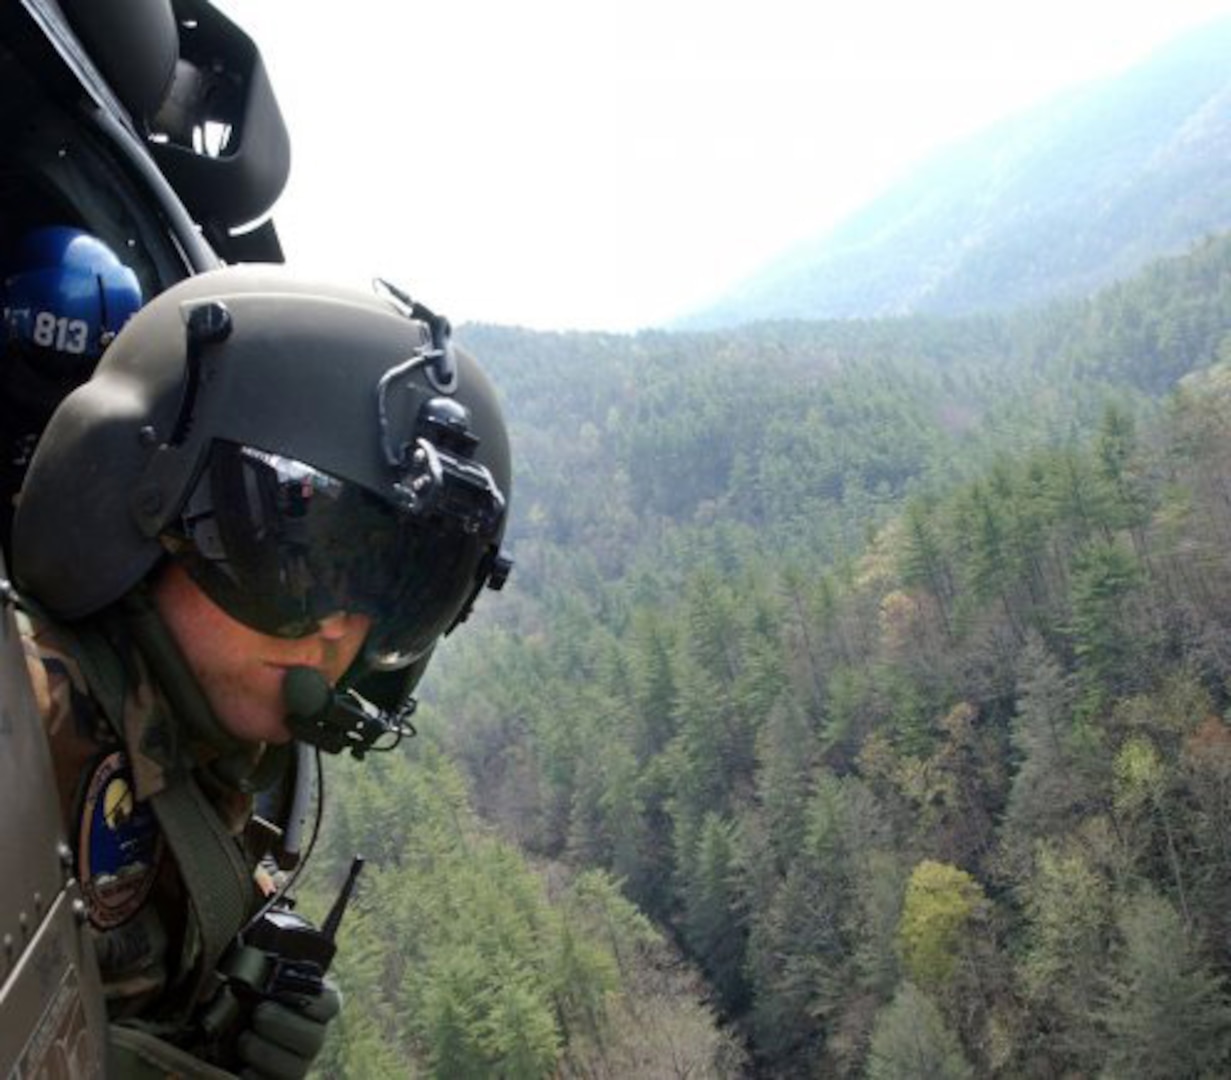 The Active Guard Reserve allows active-duty Soldiers to transfer to locations closer to home, where their skills can be put to good use. Here, a Soldier from the North Carolina Army National Guard peers from a UH-60 Black Hawk during a recent search and rescue exercise near Morganton, N.C.